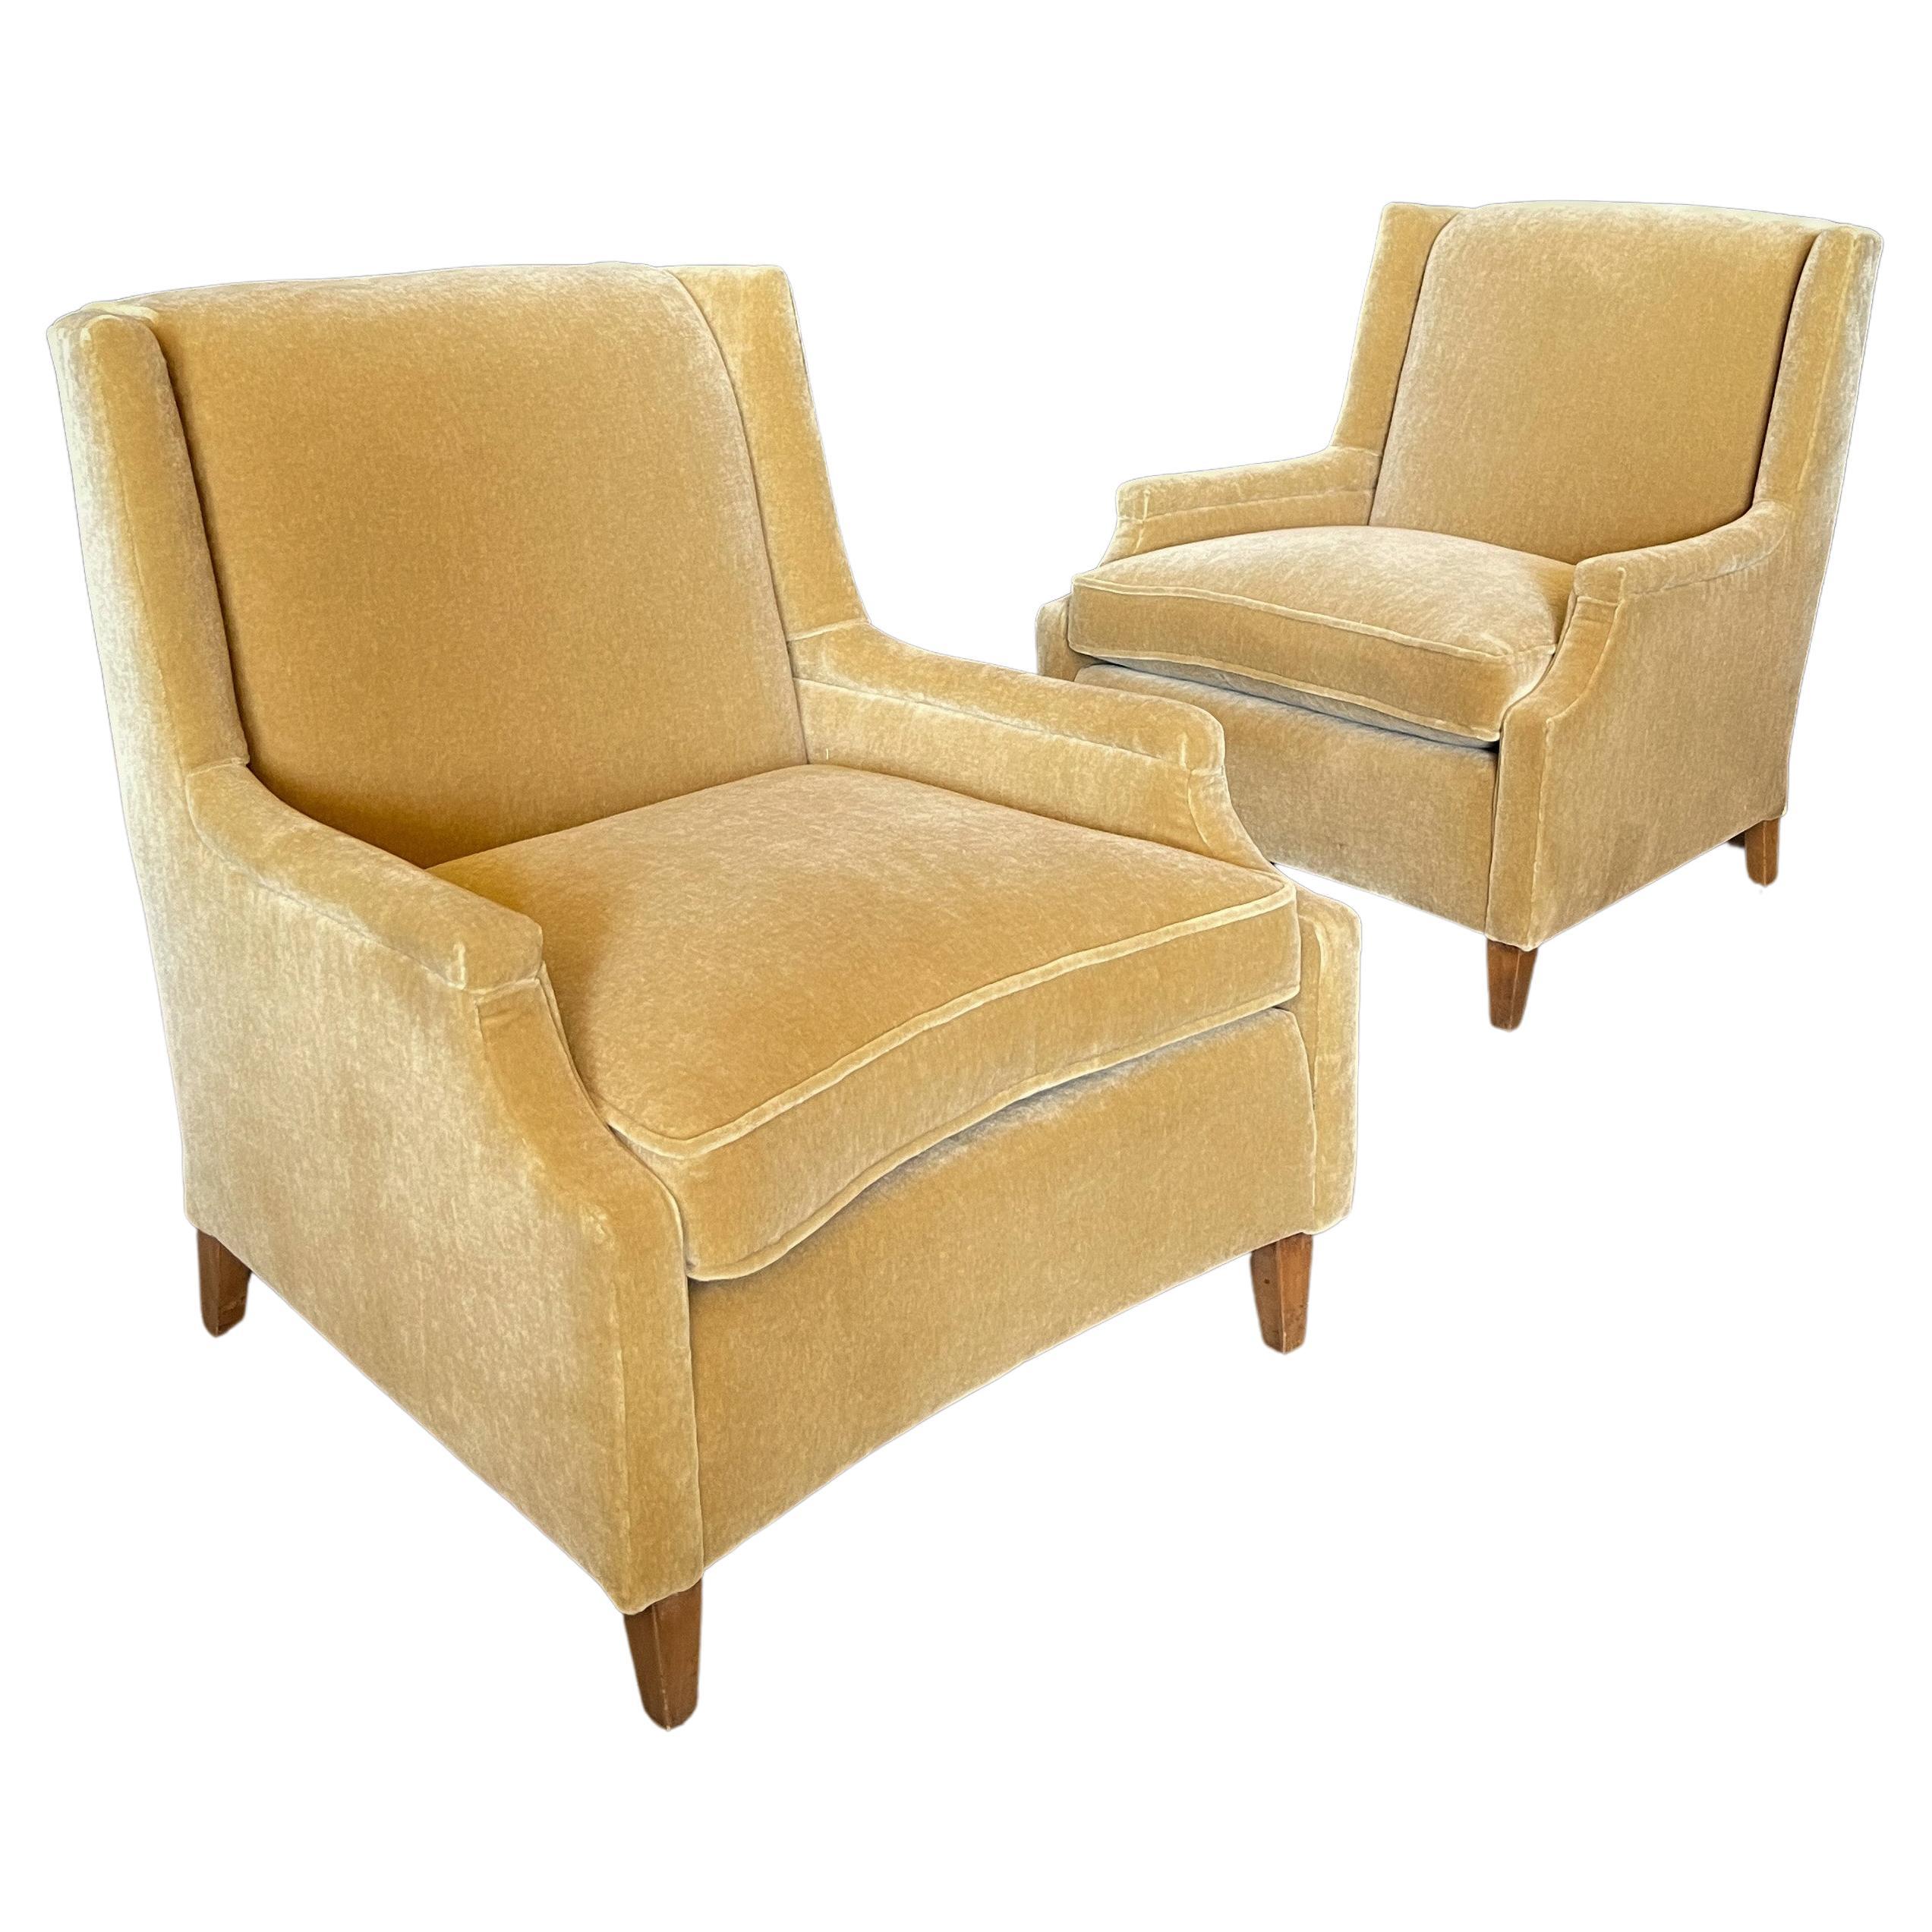 Vintage French Mohair Lounge Chairs, Art Deco, Early Mid Century, Pair For Sale